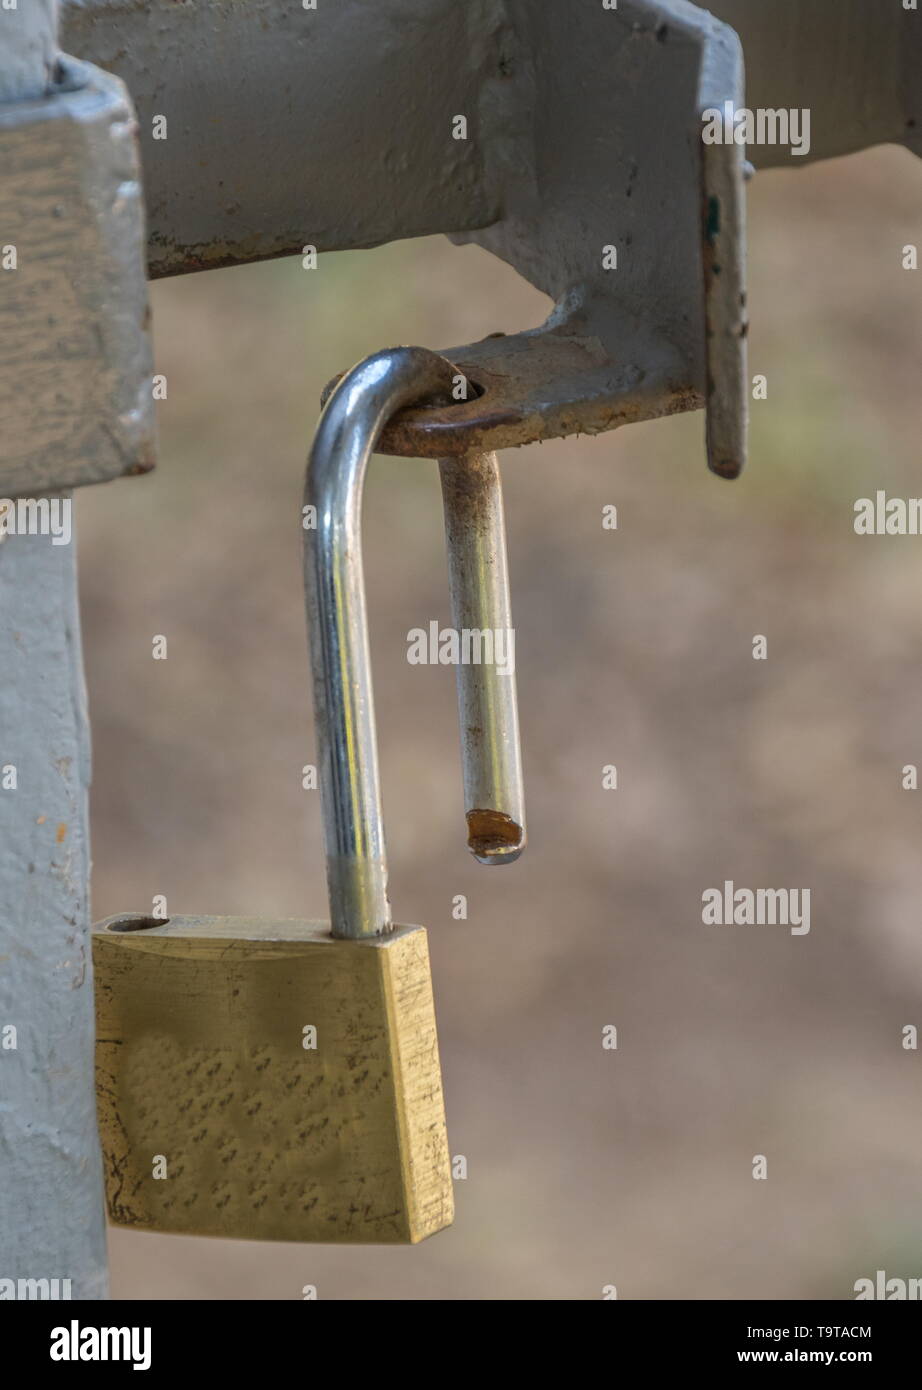 A brass colored padlock hangs from an open gate image with copy space in portrait format Stock Photo